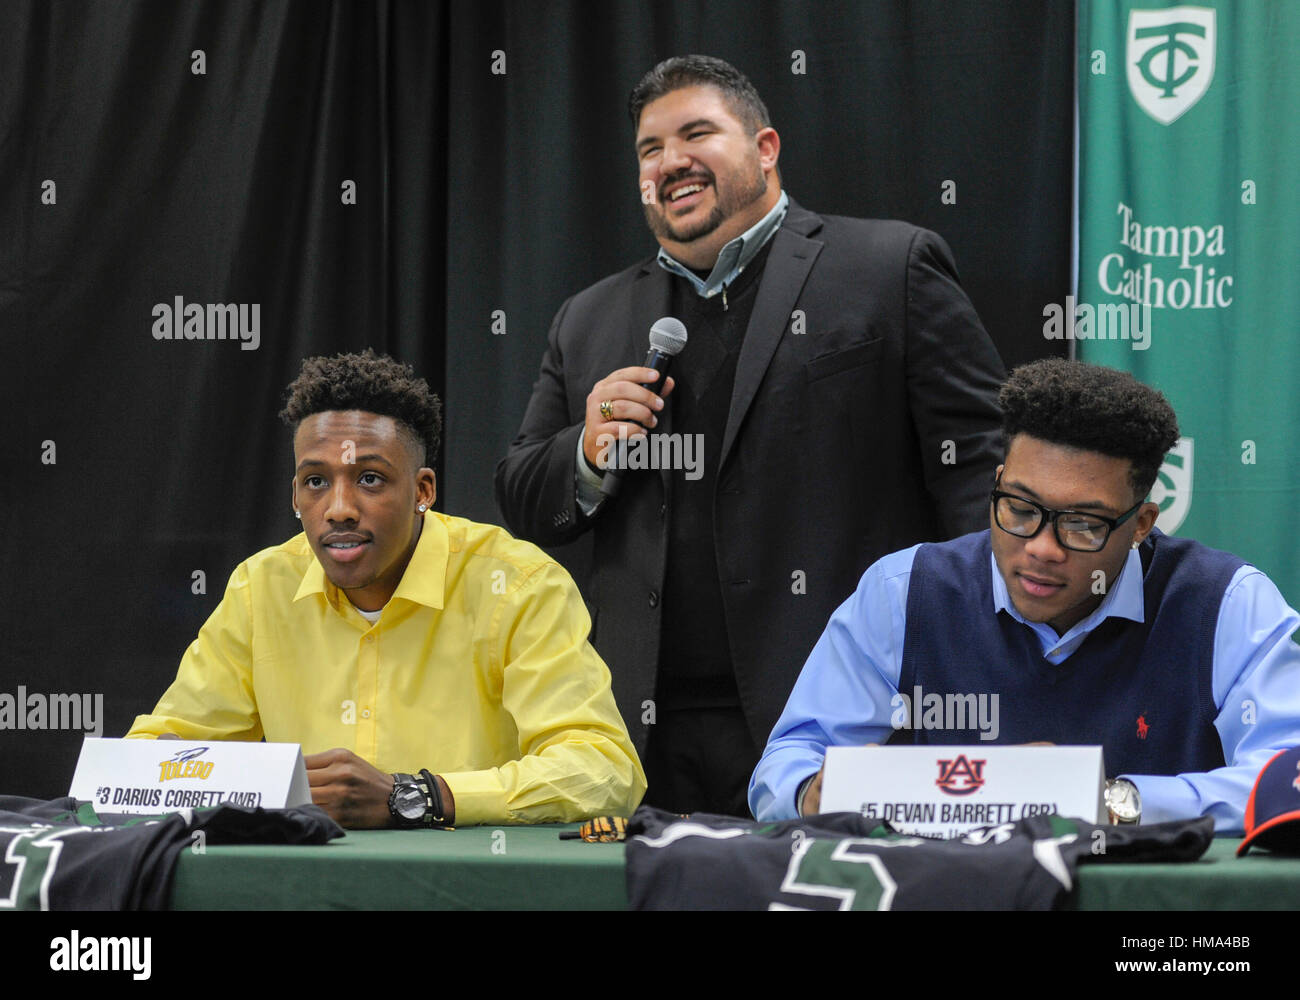 Tampa, USA. 1st Feb, 2017. Tampa Catholic football coach Mike Gregory, back, speaks as Darius Corbett, left, and Devan Barrett look during a National Signing Day ceremony held at the school in Tampa.Corbett who signed to University of Toledo, along with teammates Barrett, Auburn University, Austin Sessums, Texas Southern University and Steven Rix, Valdosta State University, and Bentlee Sanders, University of South Florida all signed during the event. Credit: Chris Urso/Tampa Bay Times/ZUMA Wire/Alamy Live News Stock Photo